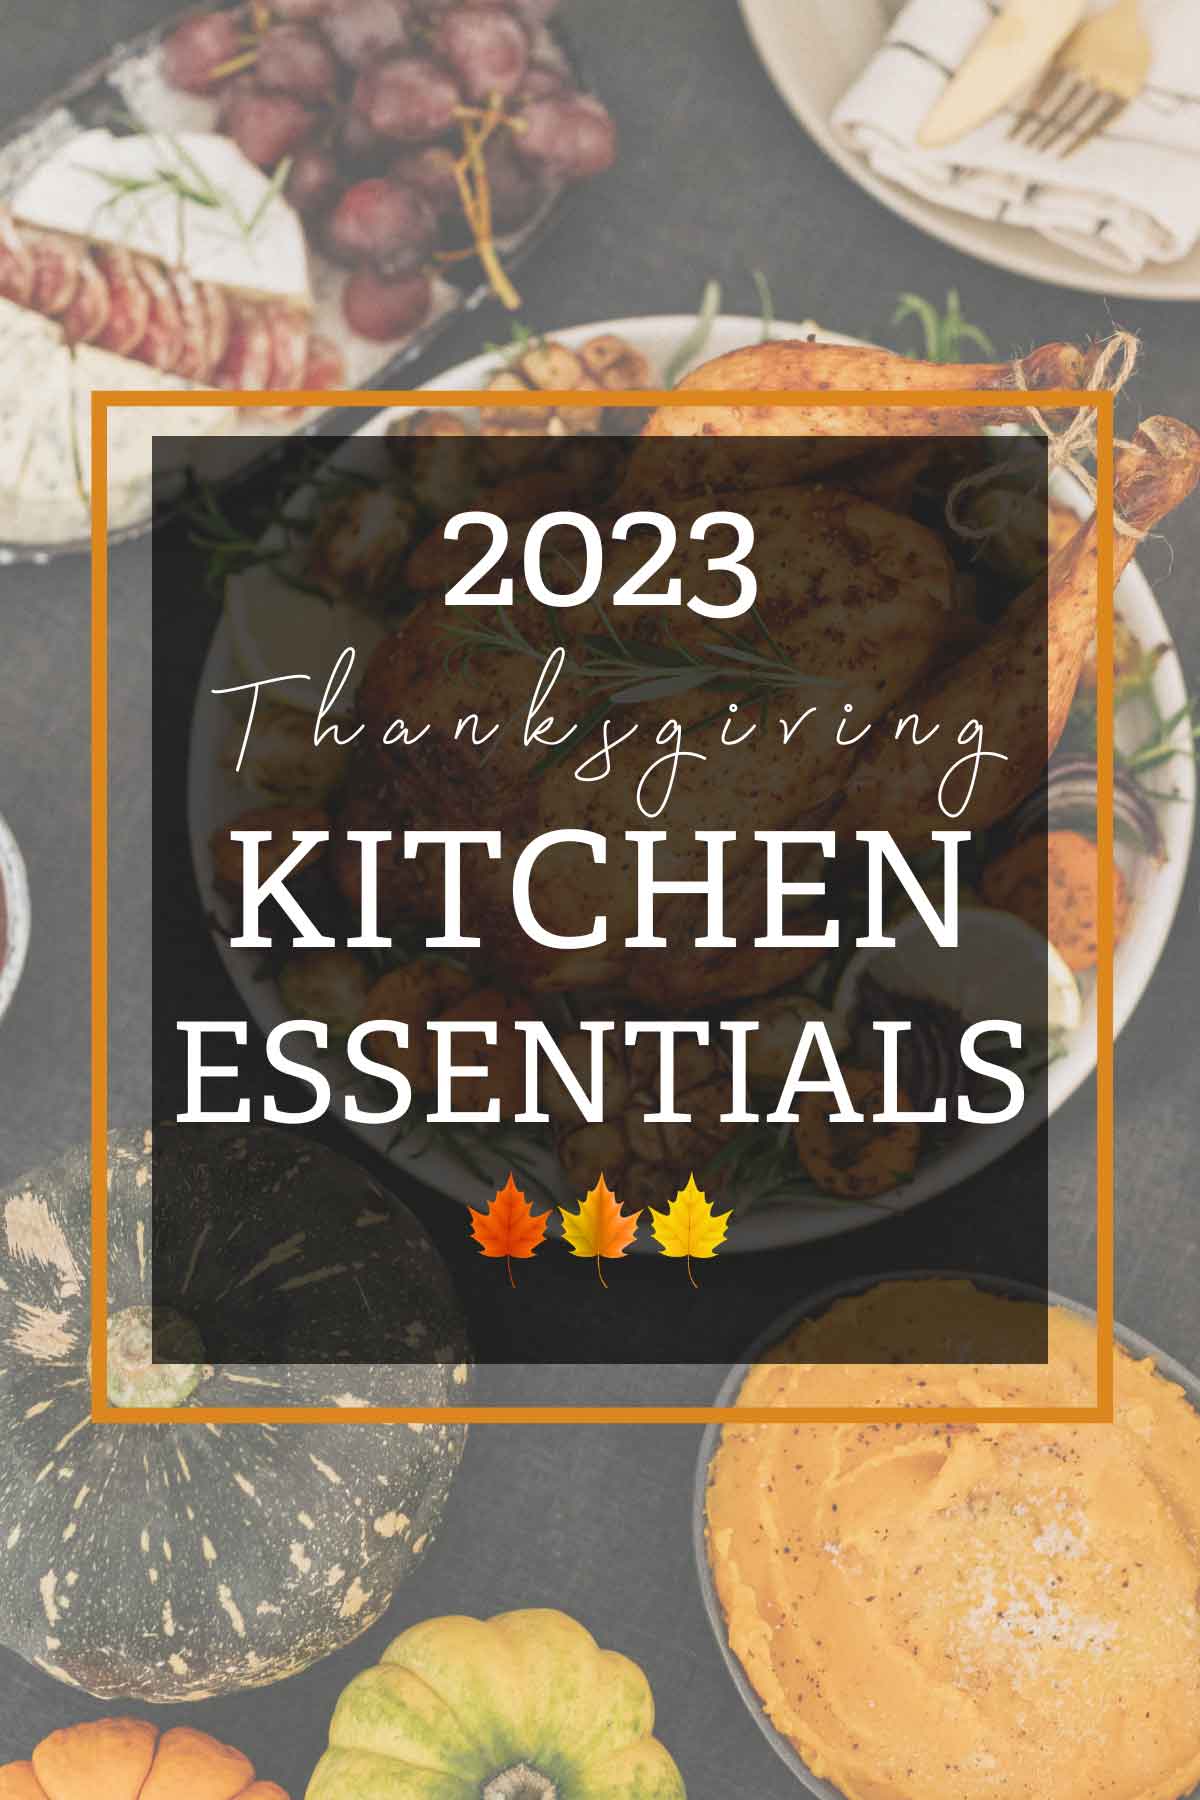 Background photo of turkey, fruit, and side dishes with text overlay of 2023 Thanksgiving Kitchen Essentials.